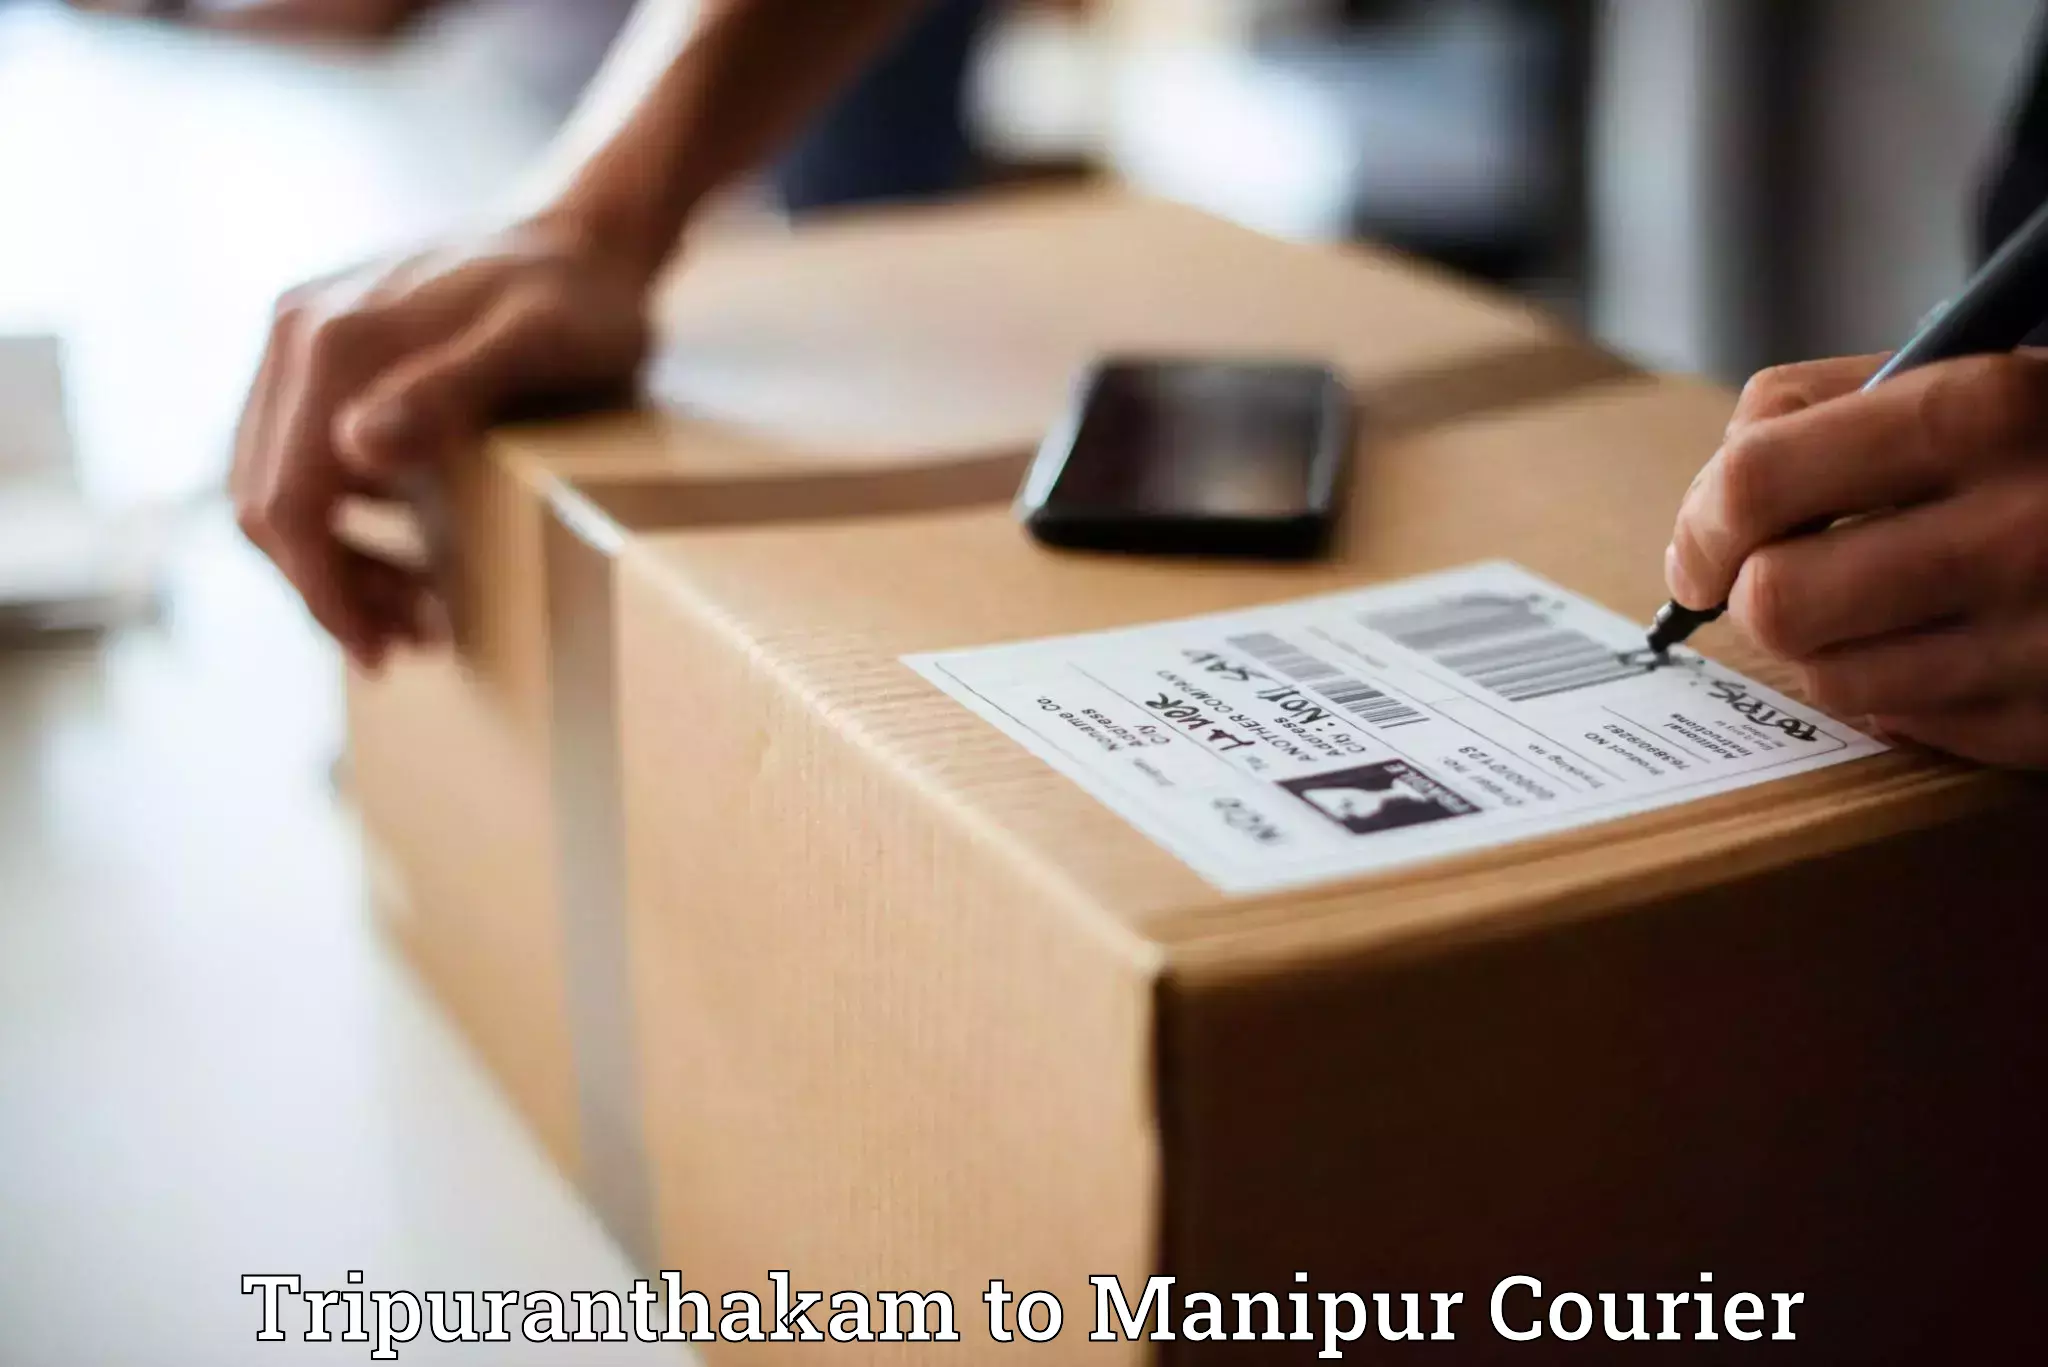 Comprehensive freight services Tripuranthakam to Manipur